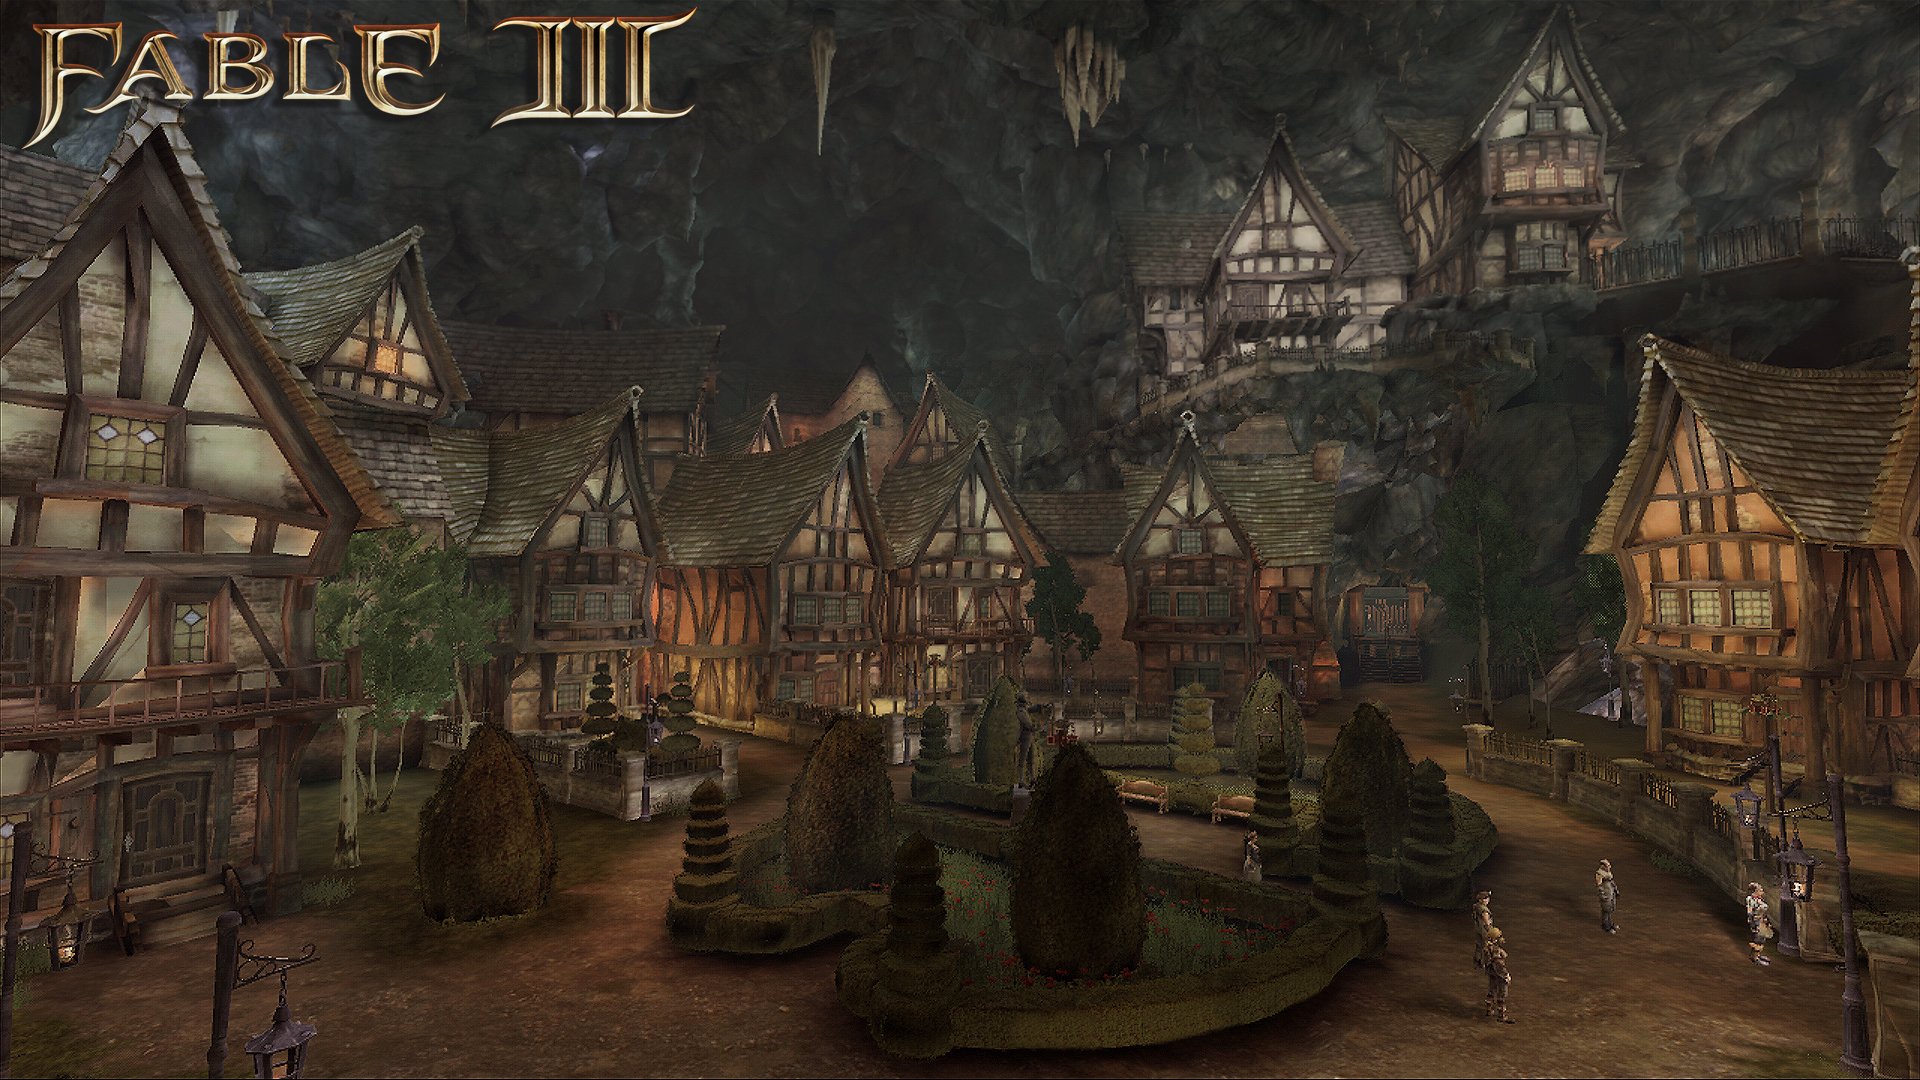 Fable cottage. Fable игра 3. Fable III (2011). Fable 2. Fable 3 DLC Understone Quest Pack.